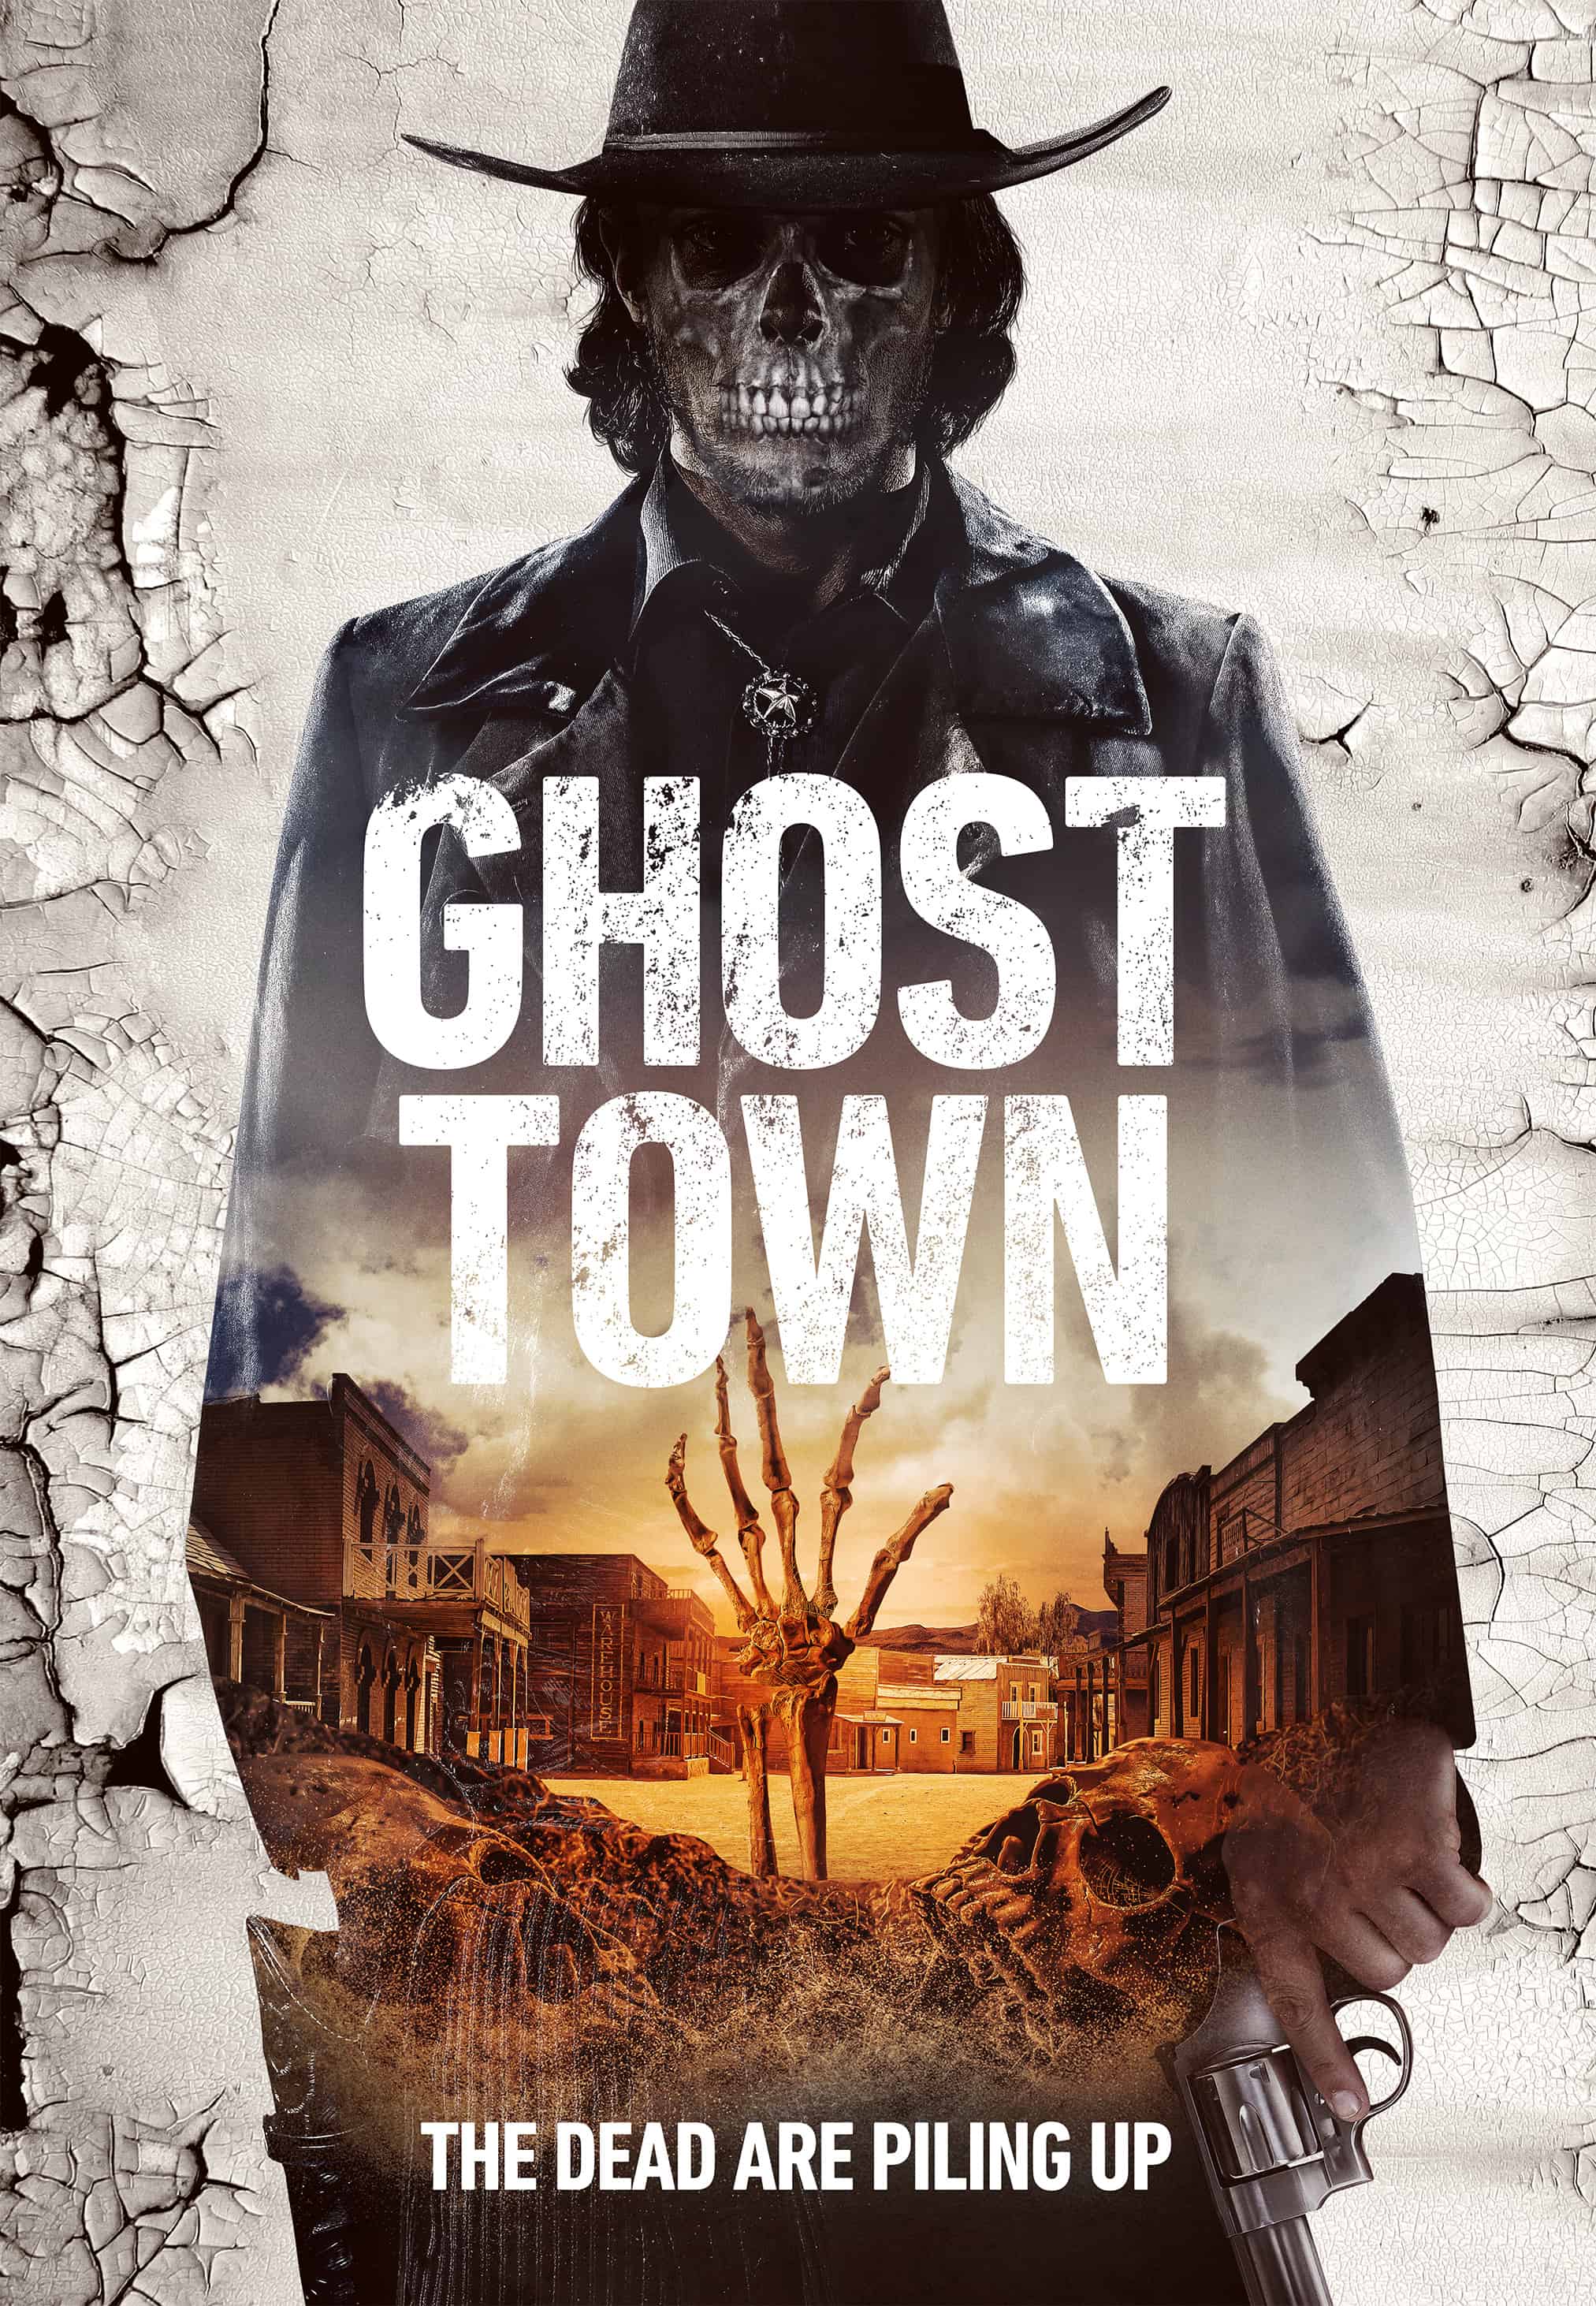 Ghost Town offers up a poster and trailer arrives March 7th 4